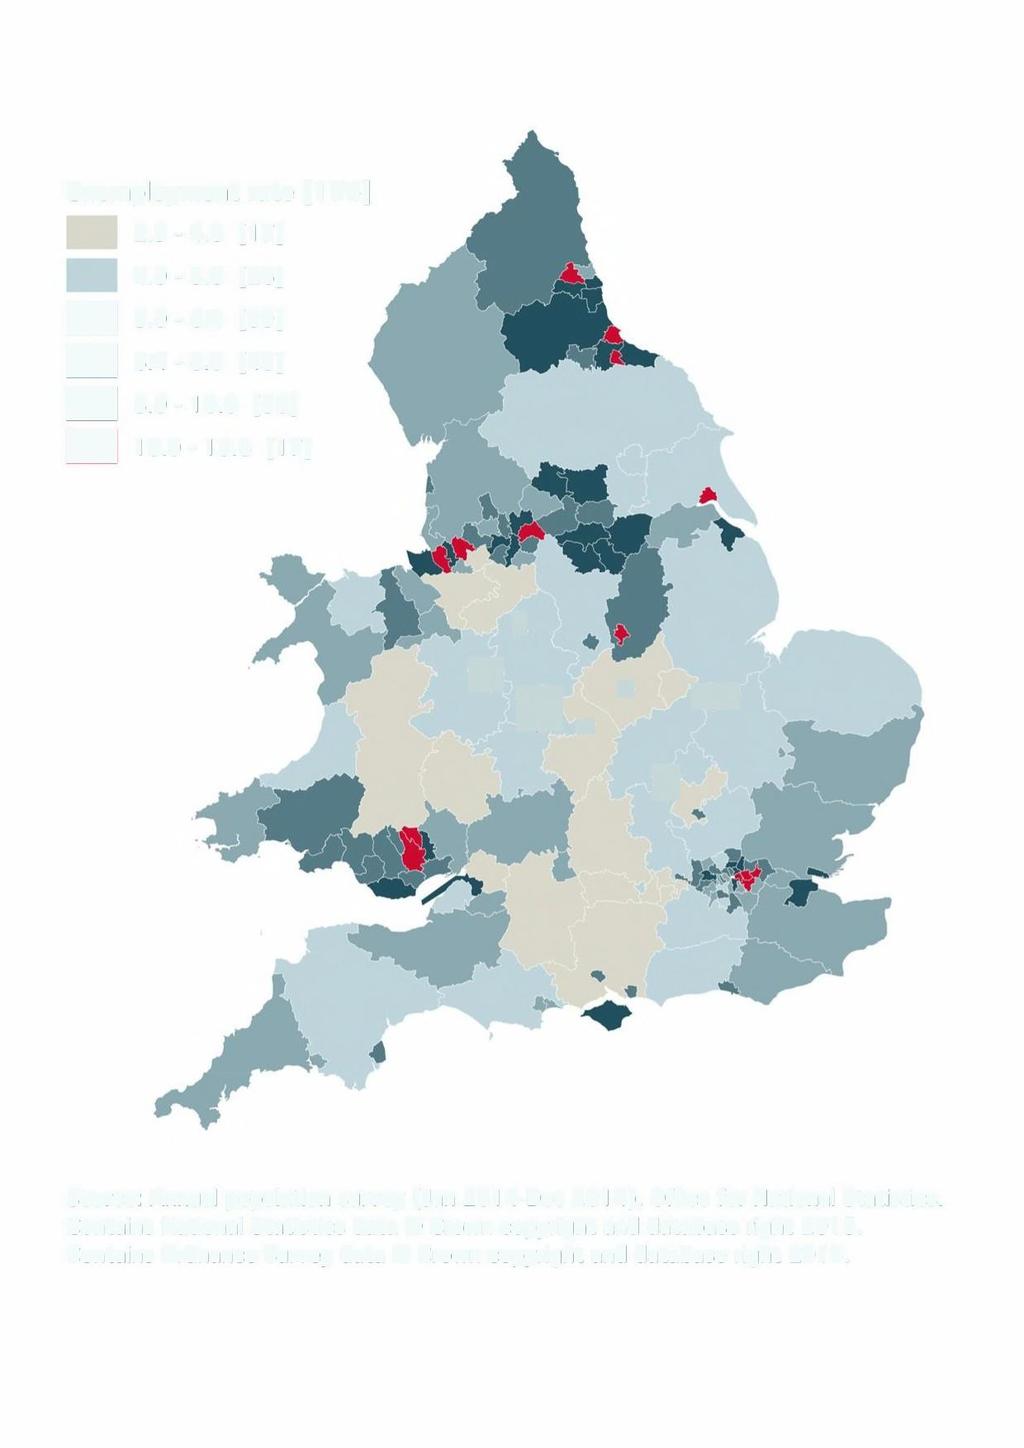 FIGURE 16: RATE OF UNEMPLOYMENT IN UPPER TIER AUTHORITY AREAS IN ENGLAND AND WALES IN 214 [RANKING AMONGST ALL LOCAL AUTHORITY DISTRICTS IN PARENTHESES] Unemployment rate [ 174] 2.9-4. [17] 4. - 5.